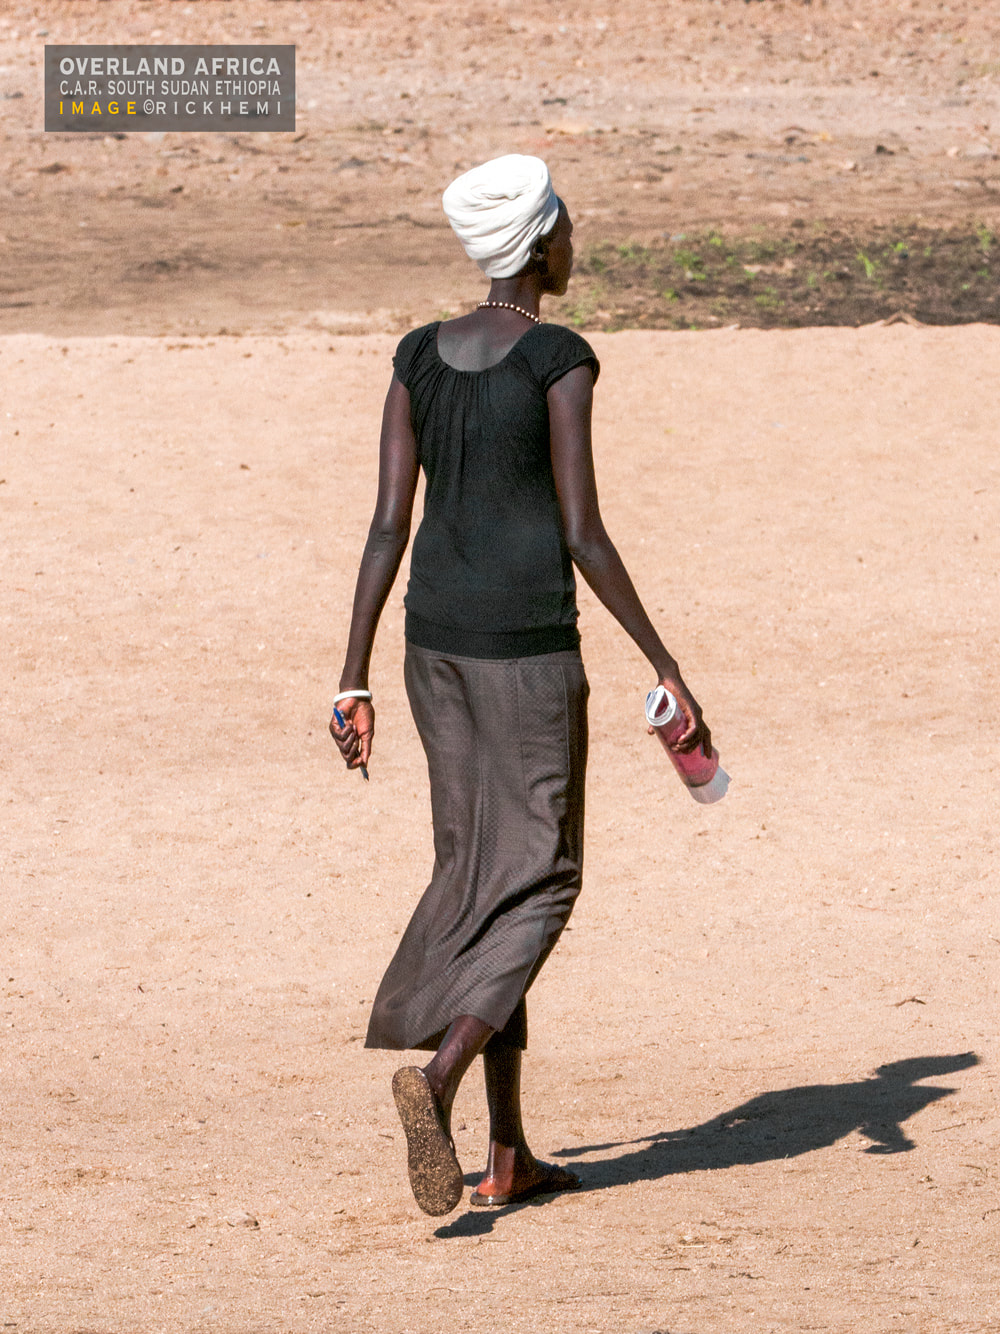 solo overland travel Africa, tall slim African beauty, image by Rick Hemi